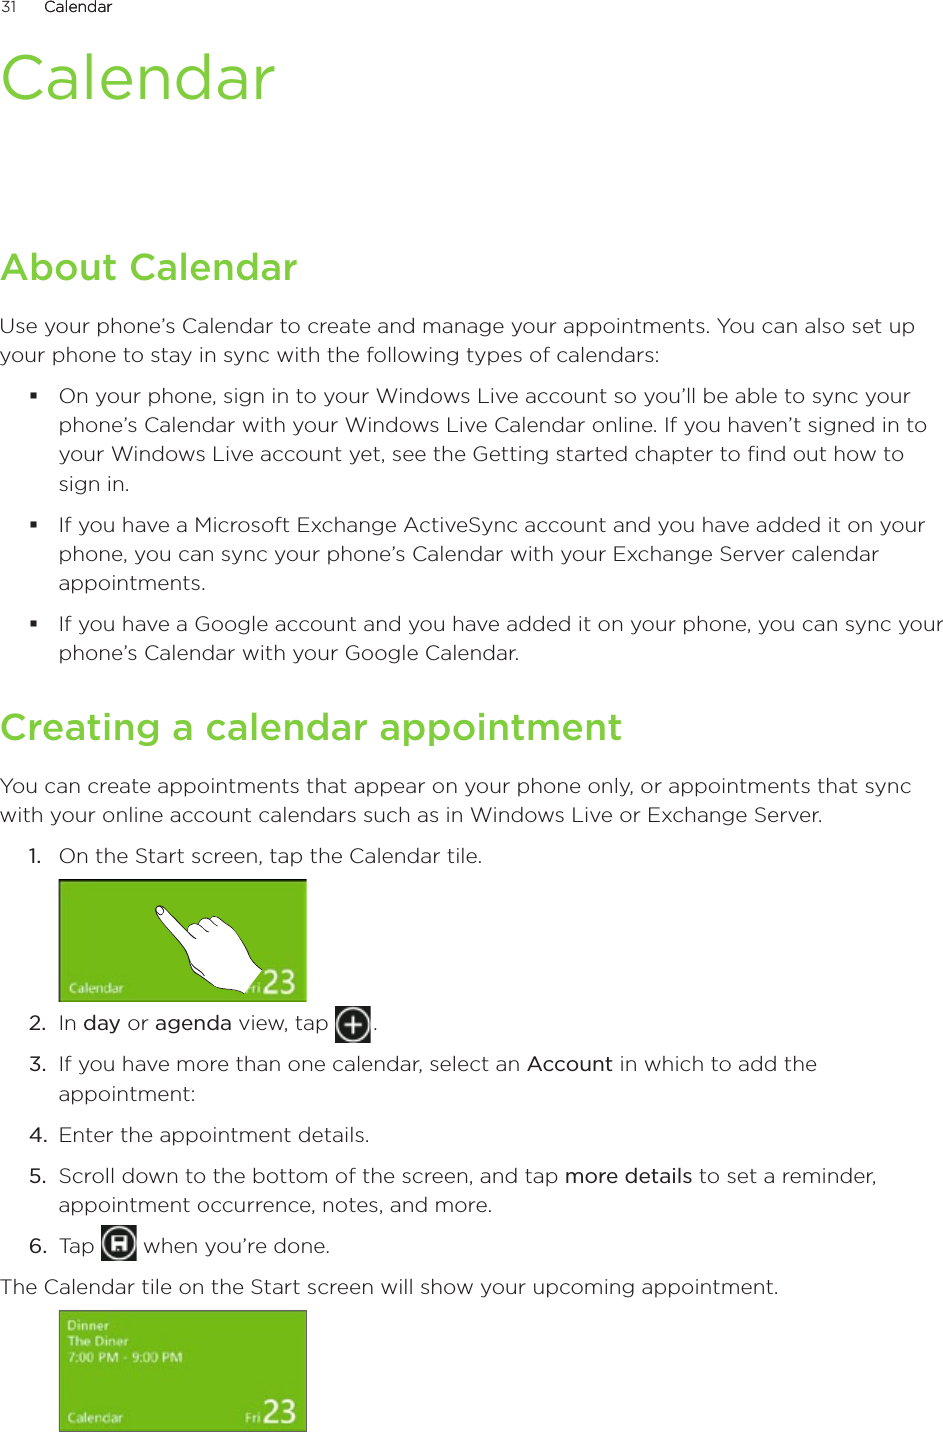 31      CalendarCalendar      CalendarAbout CalendarUse your phone’s Calendar to create and manage your appointments. You can also set up your phone to stay in sync with the following types of calendars:On your phone, sign in to your Windows Live account so you’ll be able to sync your phone’s Calendar with your Windows Live Calendar online. If you haven’t signed in to your Windows Live account yet, see the Getting started chapter to find out how to sign in.If you have a Microsoft Exchange ActiveSync account and you have added it on your phone, you can sync your phone’s Calendar with your Exchange Server calendar appointments.If you have a Google account and you have added it on your phone, you can sync your phone’s Calendar with your Google Calendar. Creating a calendar appointmentYou can create appointments that appear on your phone only, or appointments that sync with your online account calendars such as in Windows Live or Exchange Server.1.  On the Start screen, tap the Calendar tile.2.  In day or agenda view, tap   .3.  If you have more than one calendar, select an Account in which to add the appointment:4.  Enter the appointment details.5.  Scroll down to the bottom of the screen, and tap more details to set a reminder, appointment occurrence, notes, and more.6.  Tap   when you’re done.The Calendar tile on the Start screen will show your upcoming appointment.